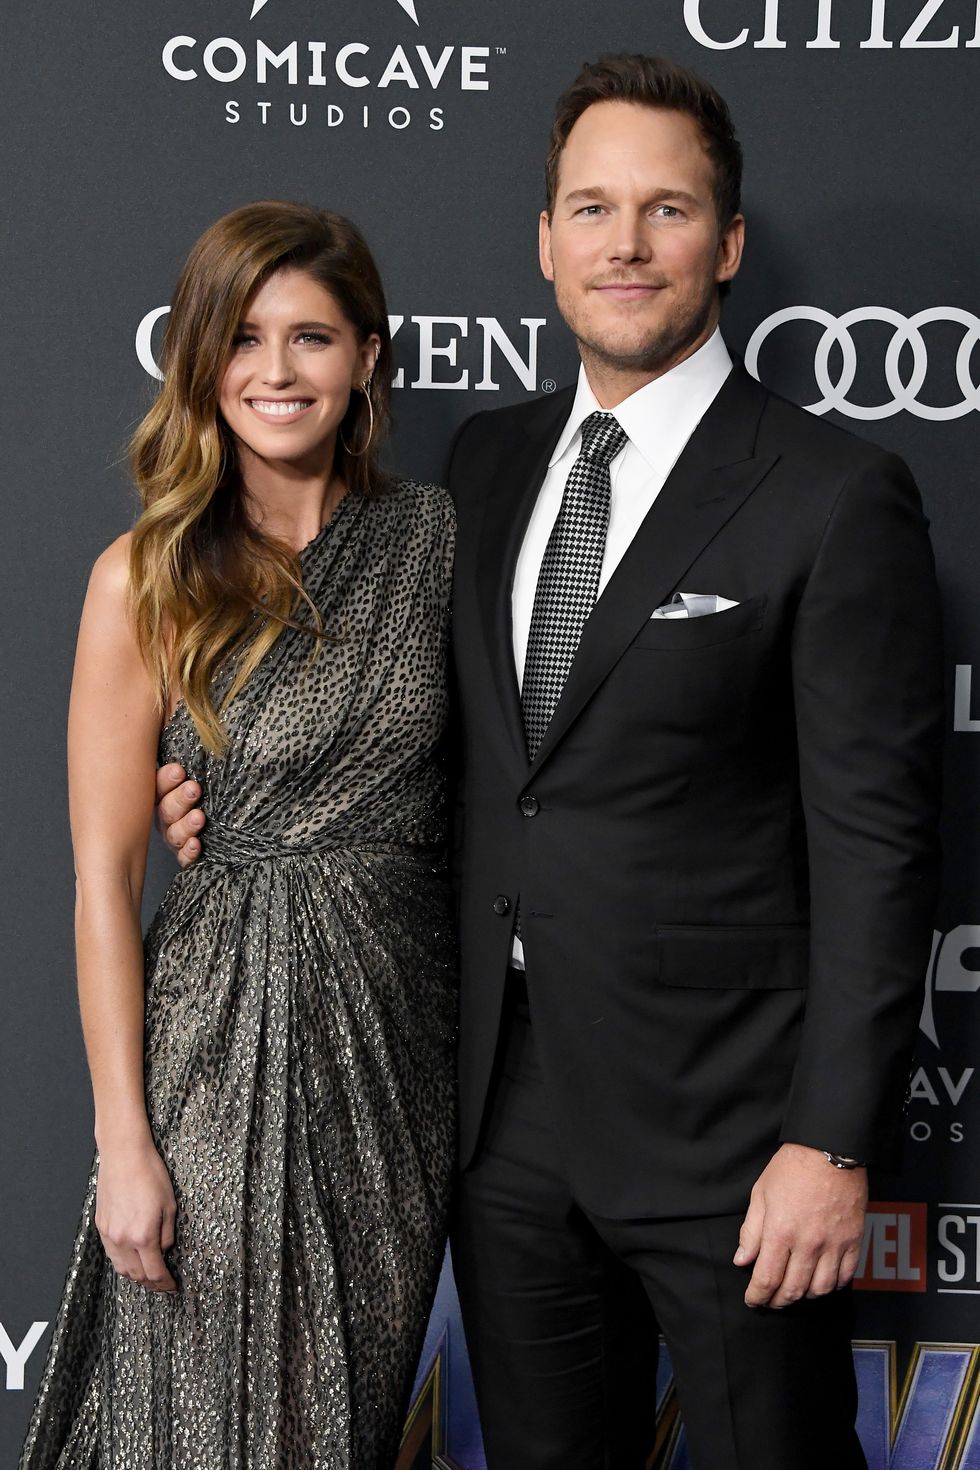 los angeles, ca april 22 katherine schwarzenegger l and chris pratt attend the world premiere of walt disney studios motion pictures avengers endgame at the los angeles convention center on april 22, 2019 in los angeles, california photo by steve granitzwireimage